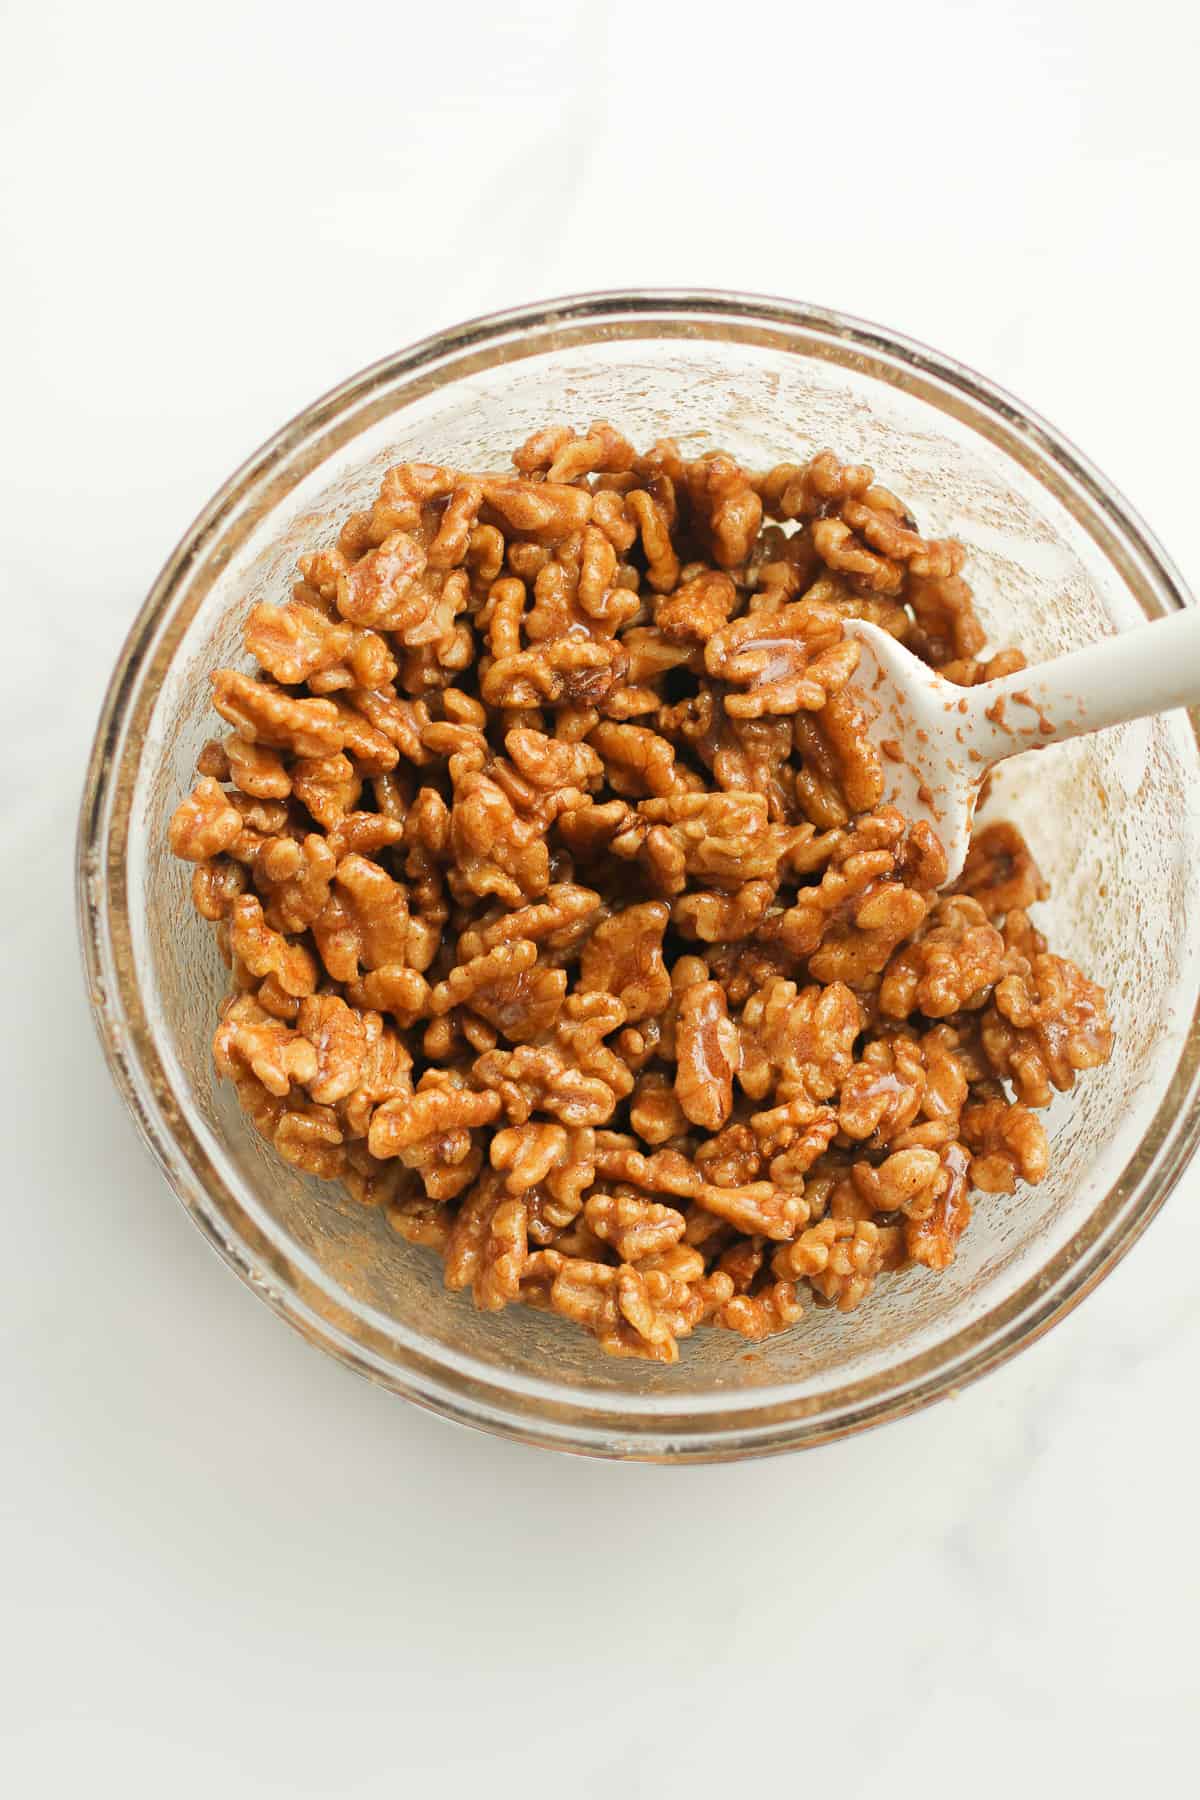 A bowl of the walnuts with the candied topping.